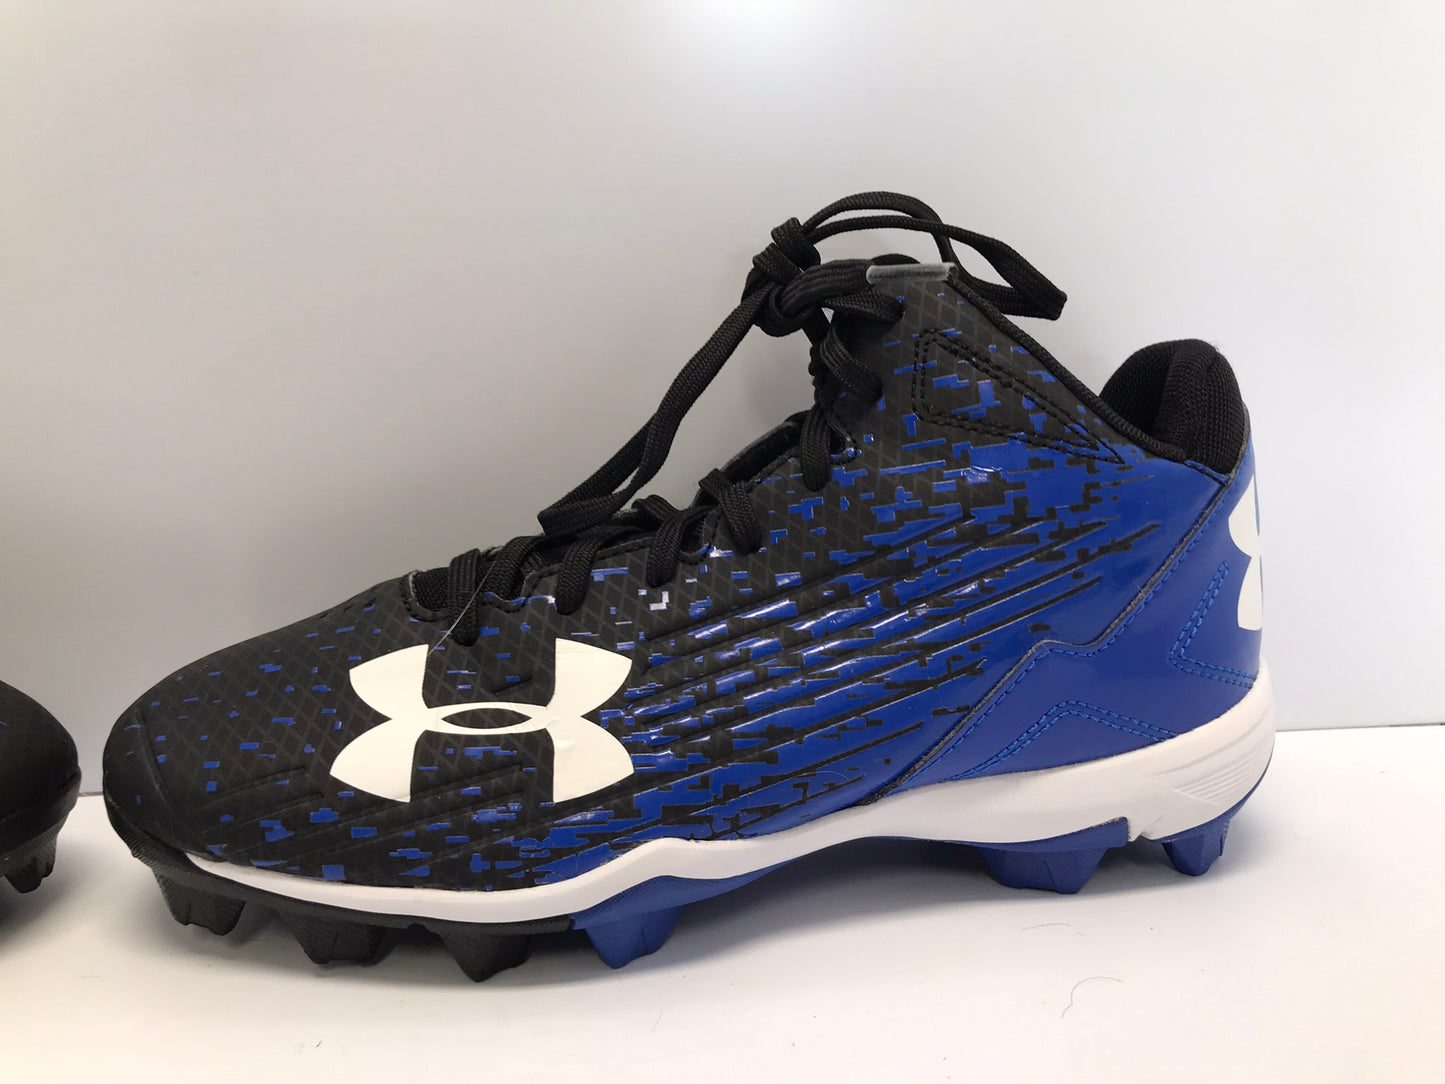 Baseball Shoes Cleats Men's Size 7.5 Under Armour Black Blue New Demo Model